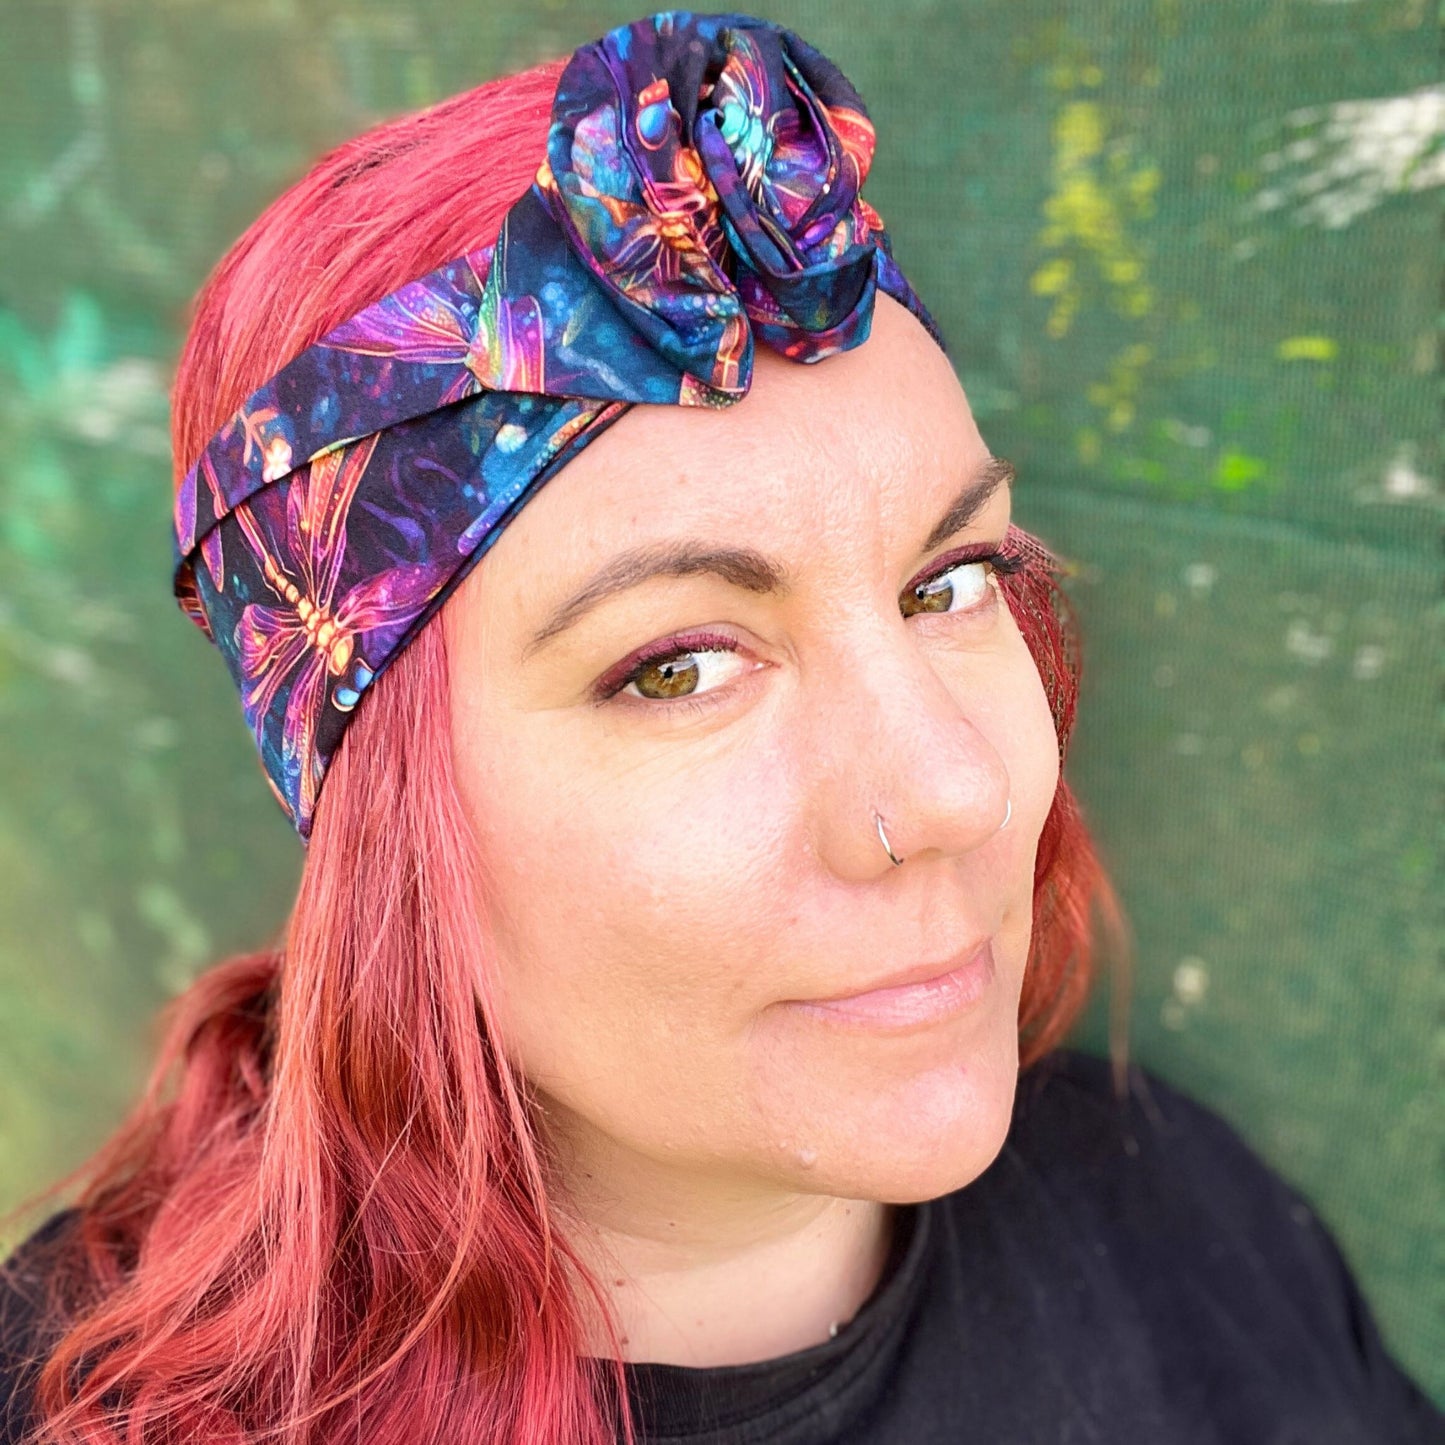 wearing a wire headwrap adorned with a kaleidoscope of colors, the pattern dragonflys. The headwrap is tied stylishly off to the side